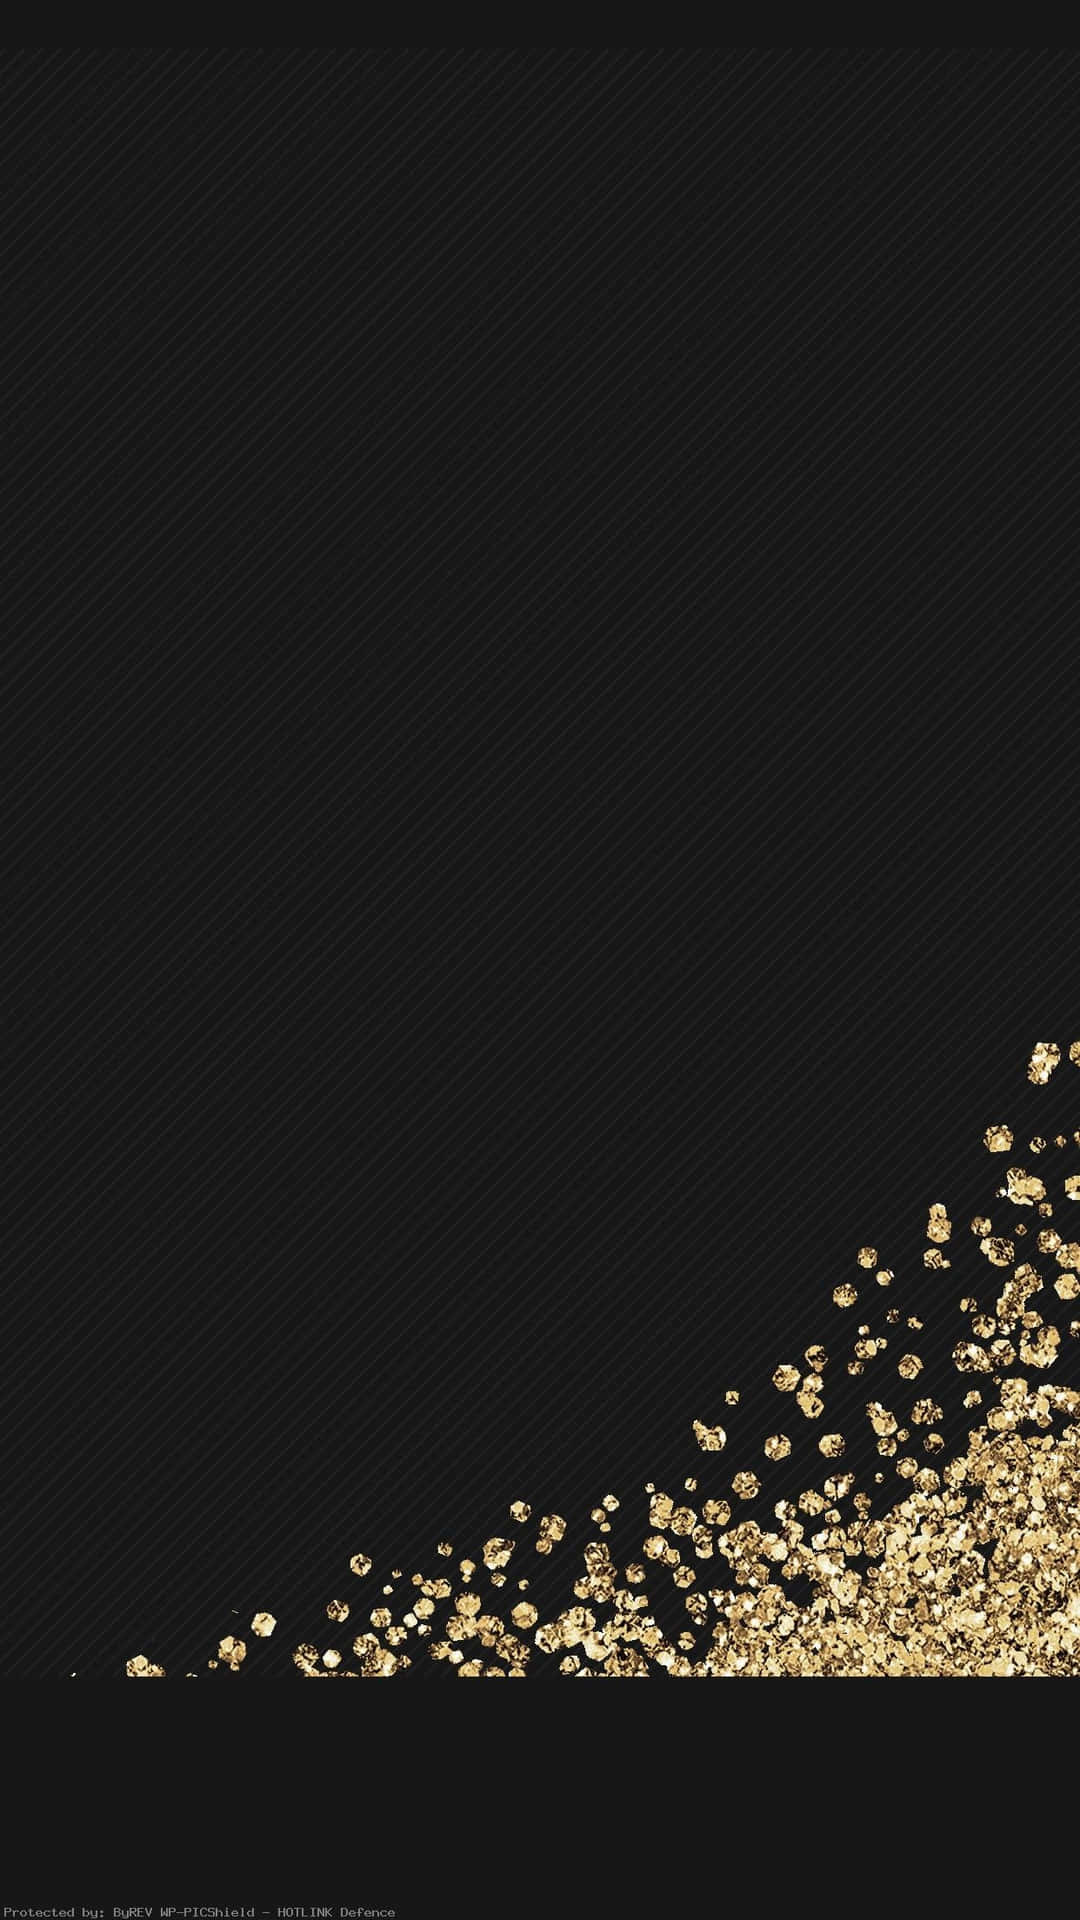 Gold Flakes Falling On A Black Background